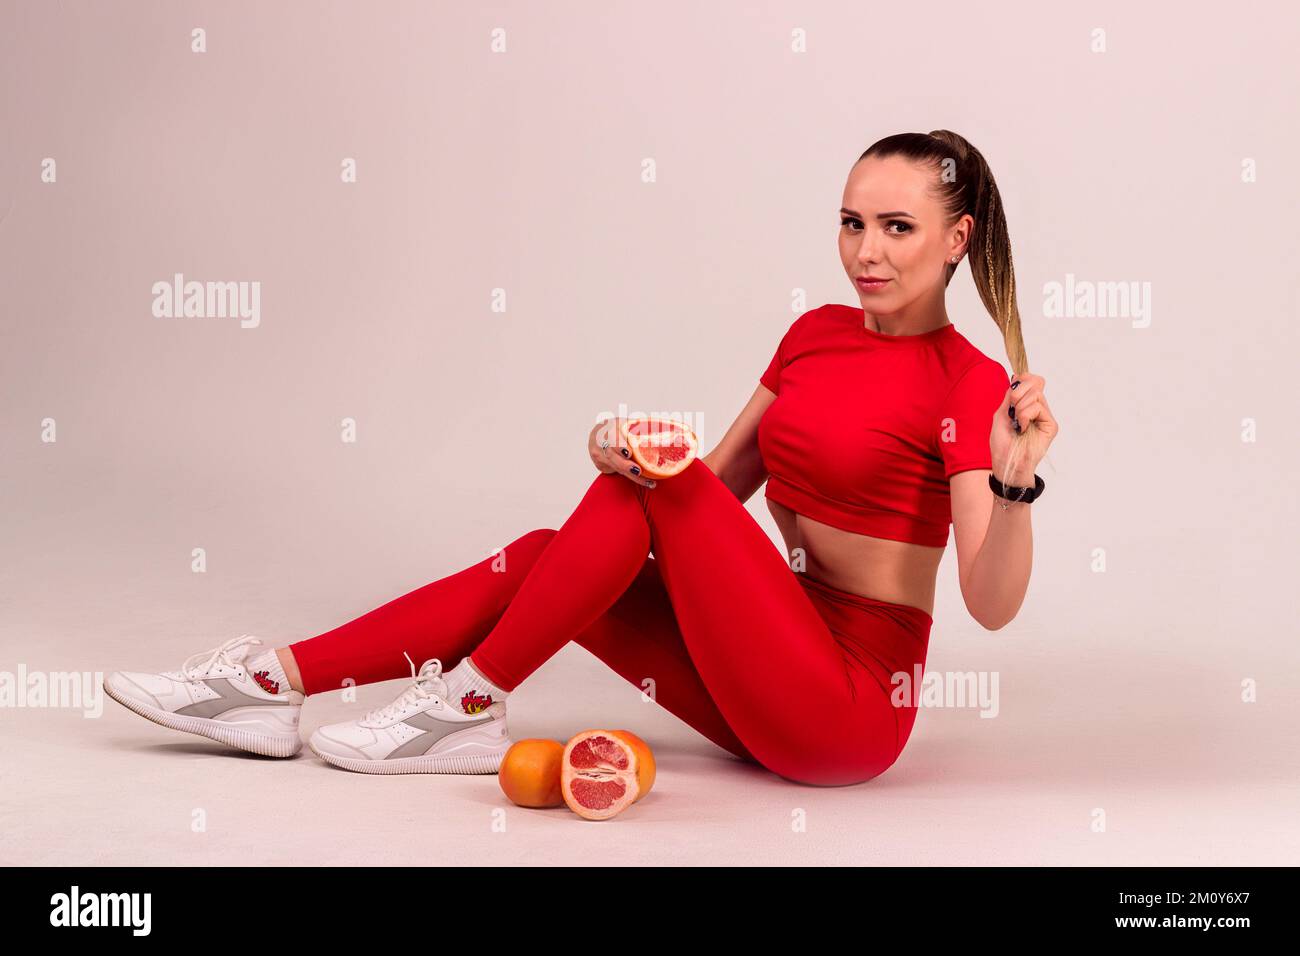 A young woman in a red suit holds a cut grapefruit in her hands Stock Photo